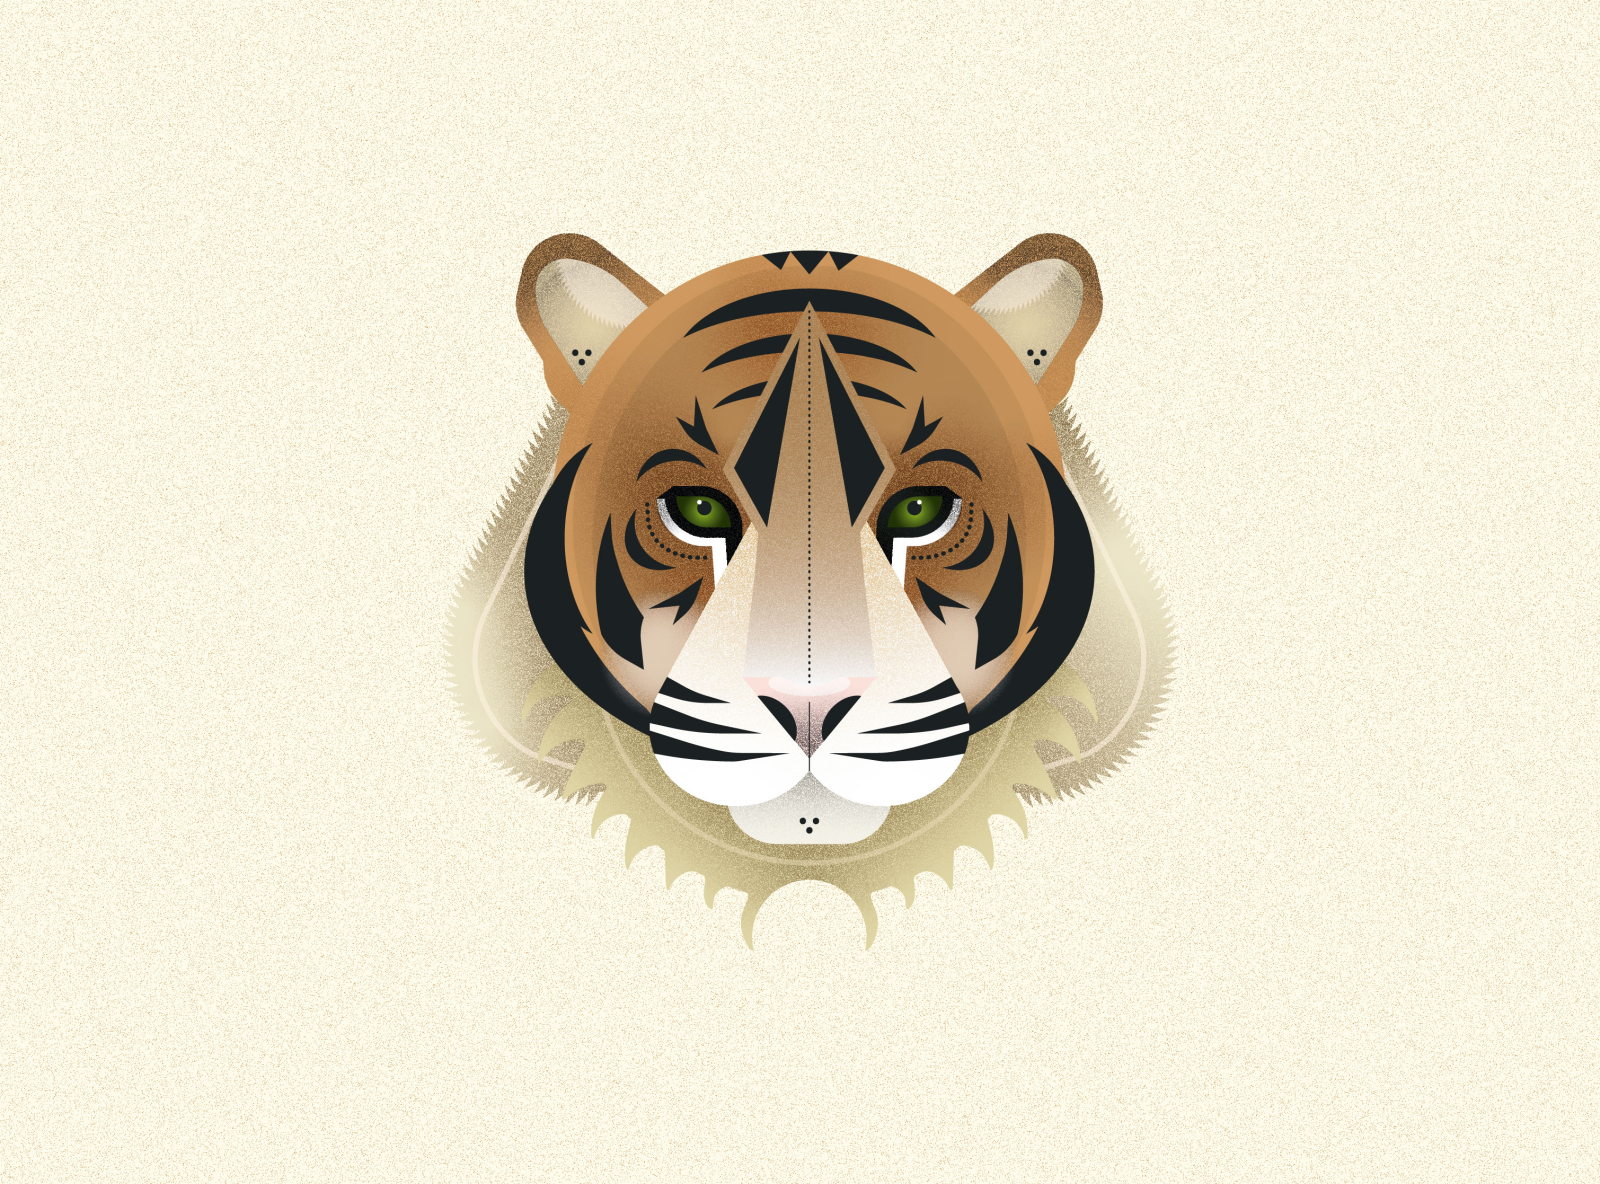 Tiger King by Emily Smith on Dribbble